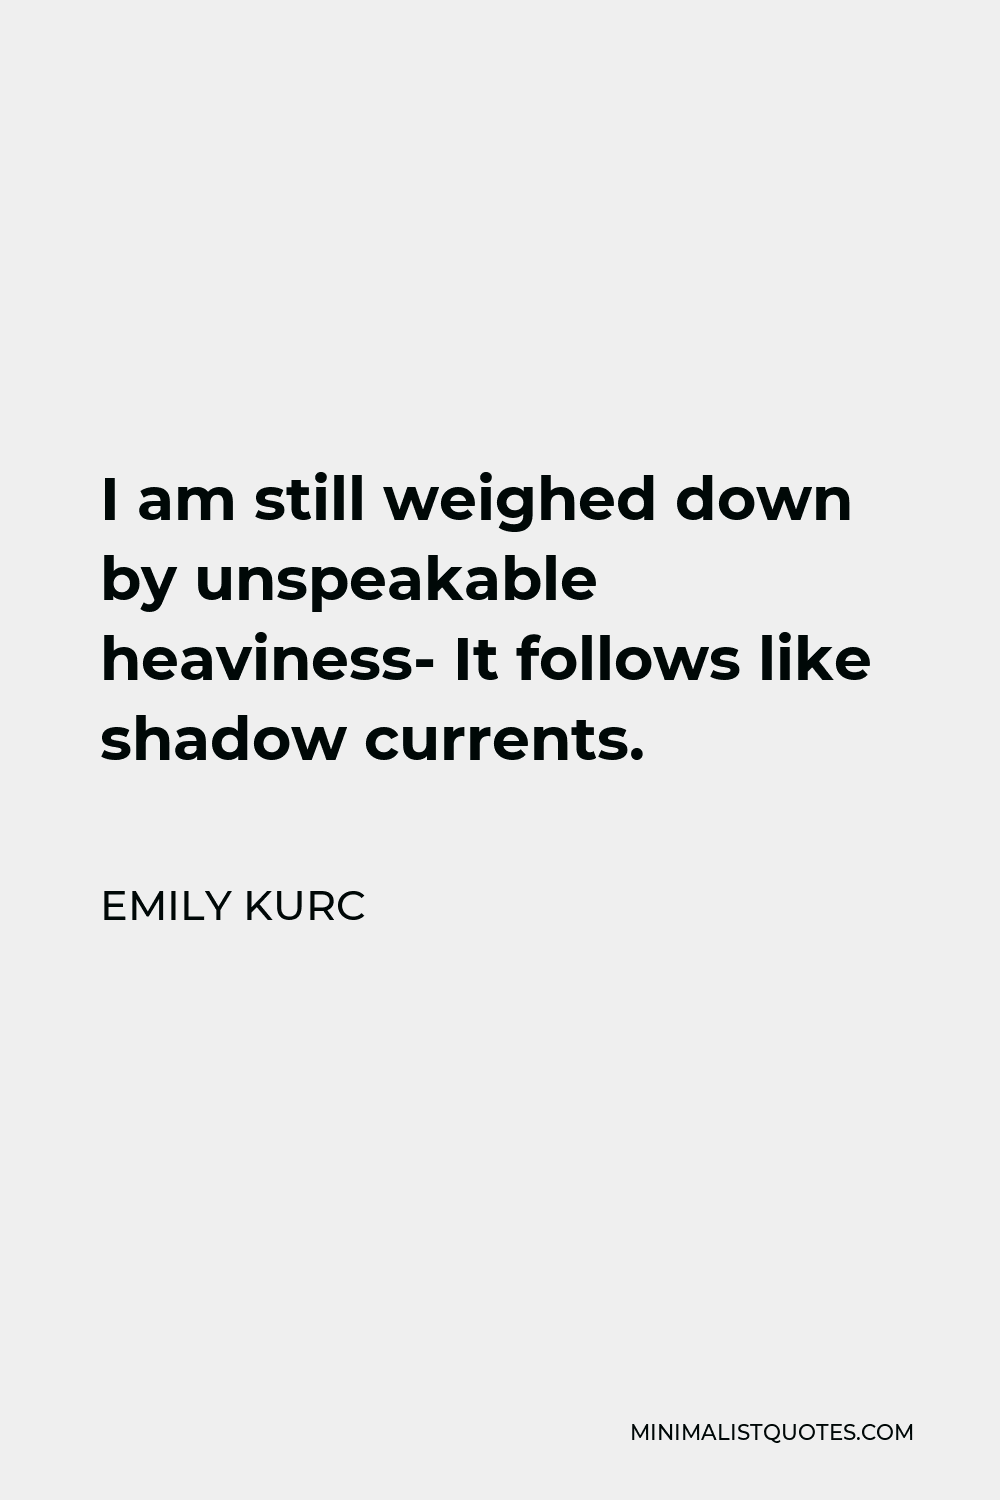 Emily Kurc Quote - I am still weighed down by unspeakable heaviness- It follows like shadow currents.